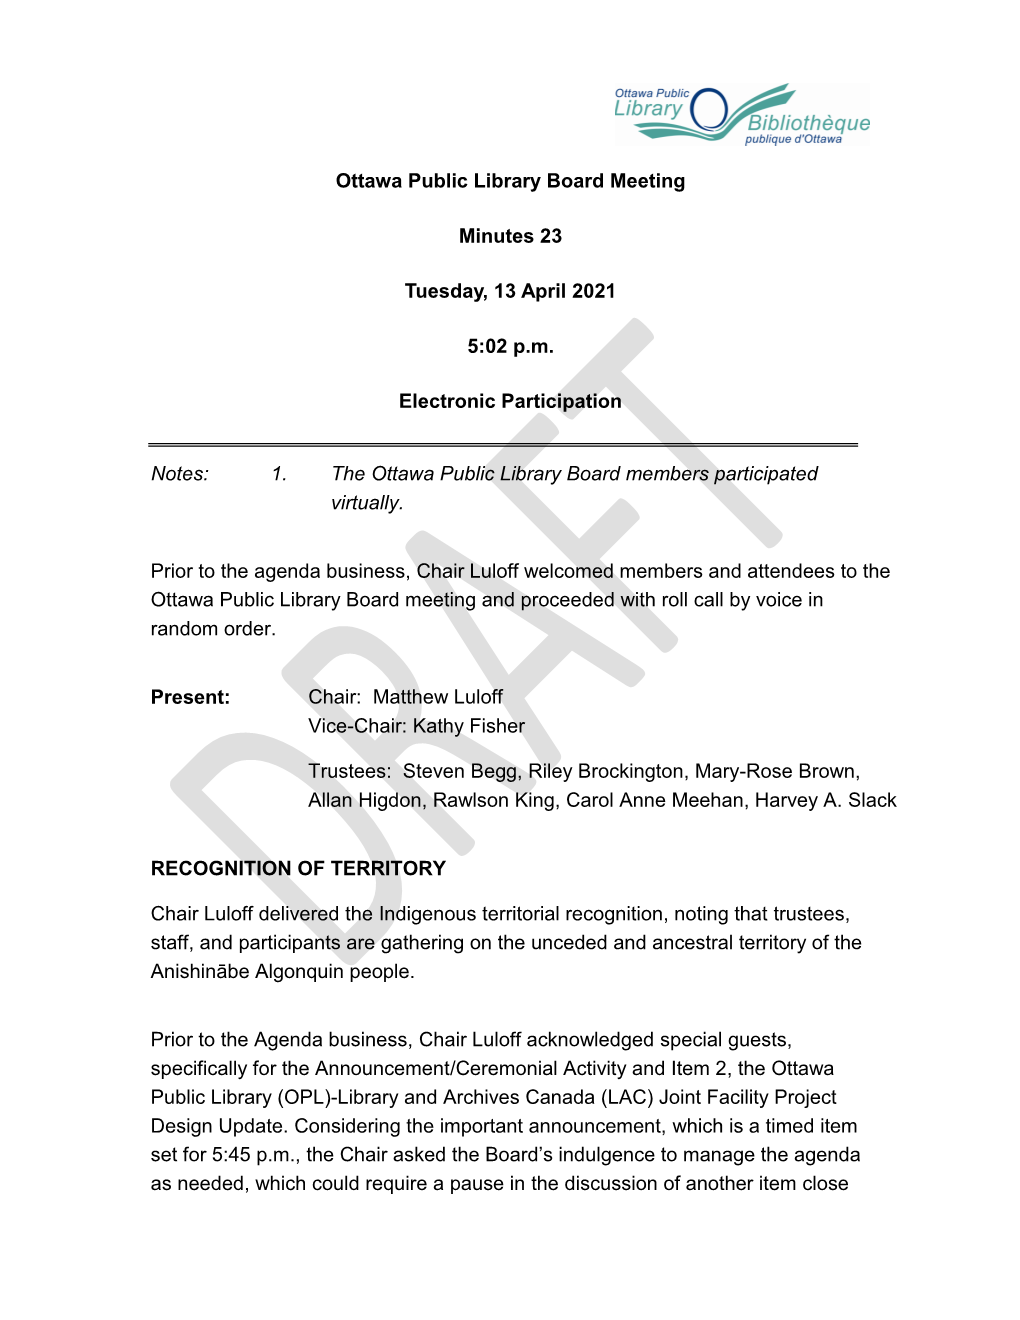 Ottawa Public Library Board Meeting Minutes 23 Tuesday, 13